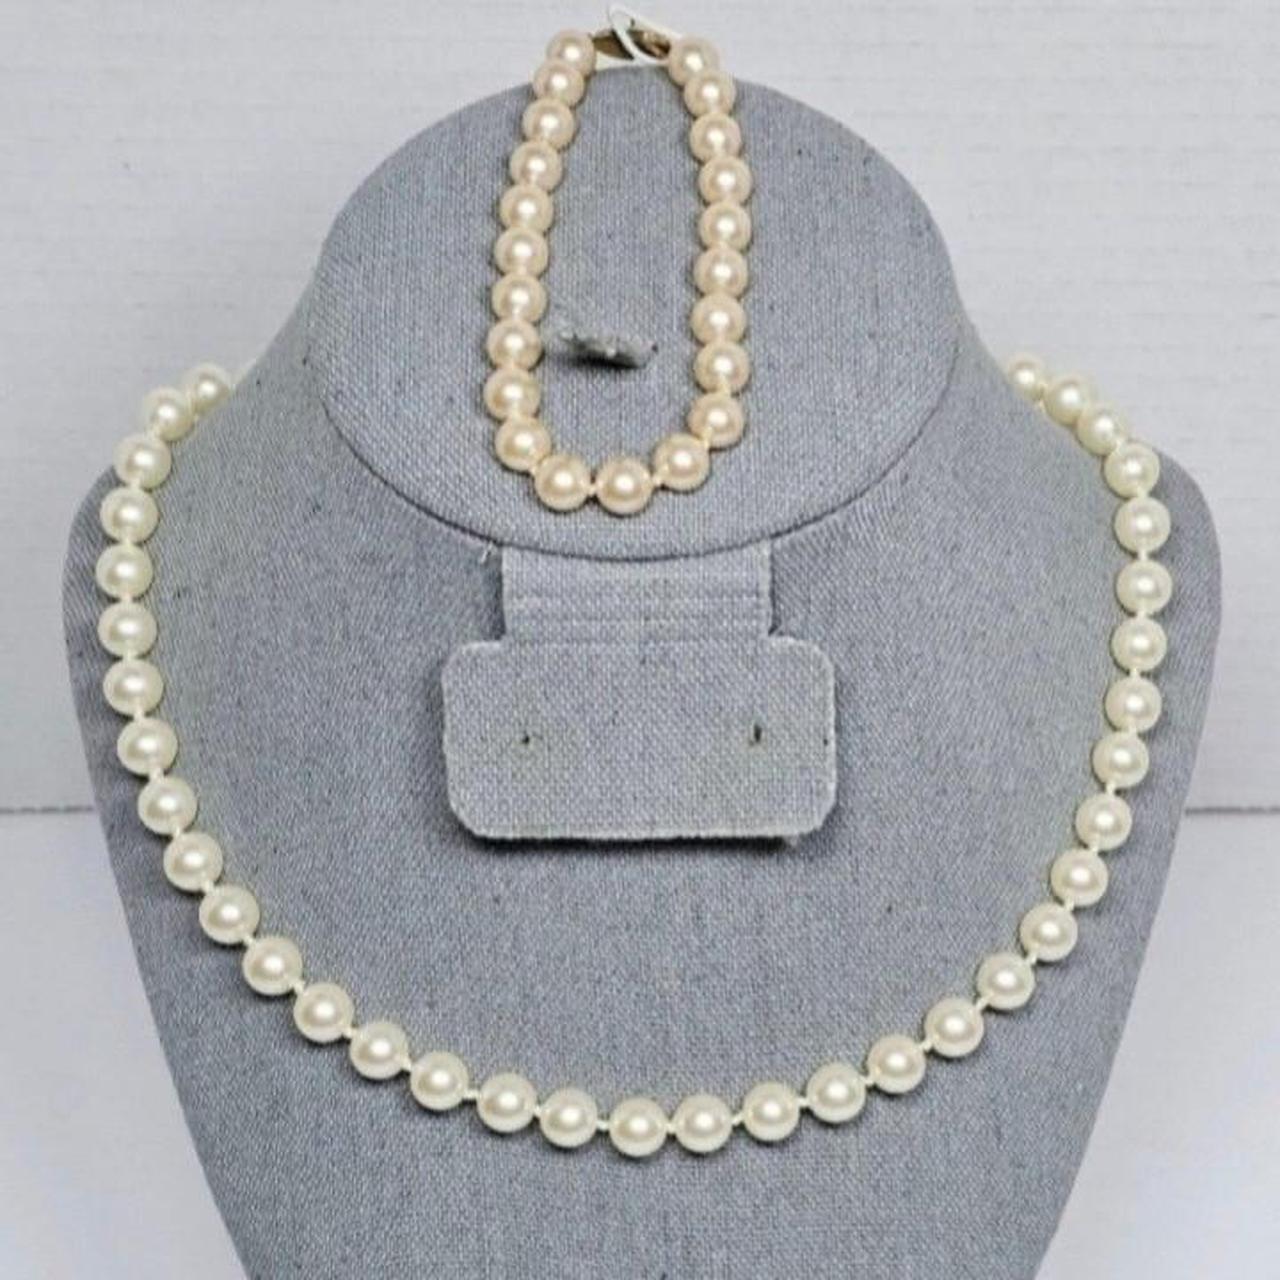 Monet Jewelry Simulated Pearl 18 Inch Cable Illusion Necklace | CoolSprings  Galleria